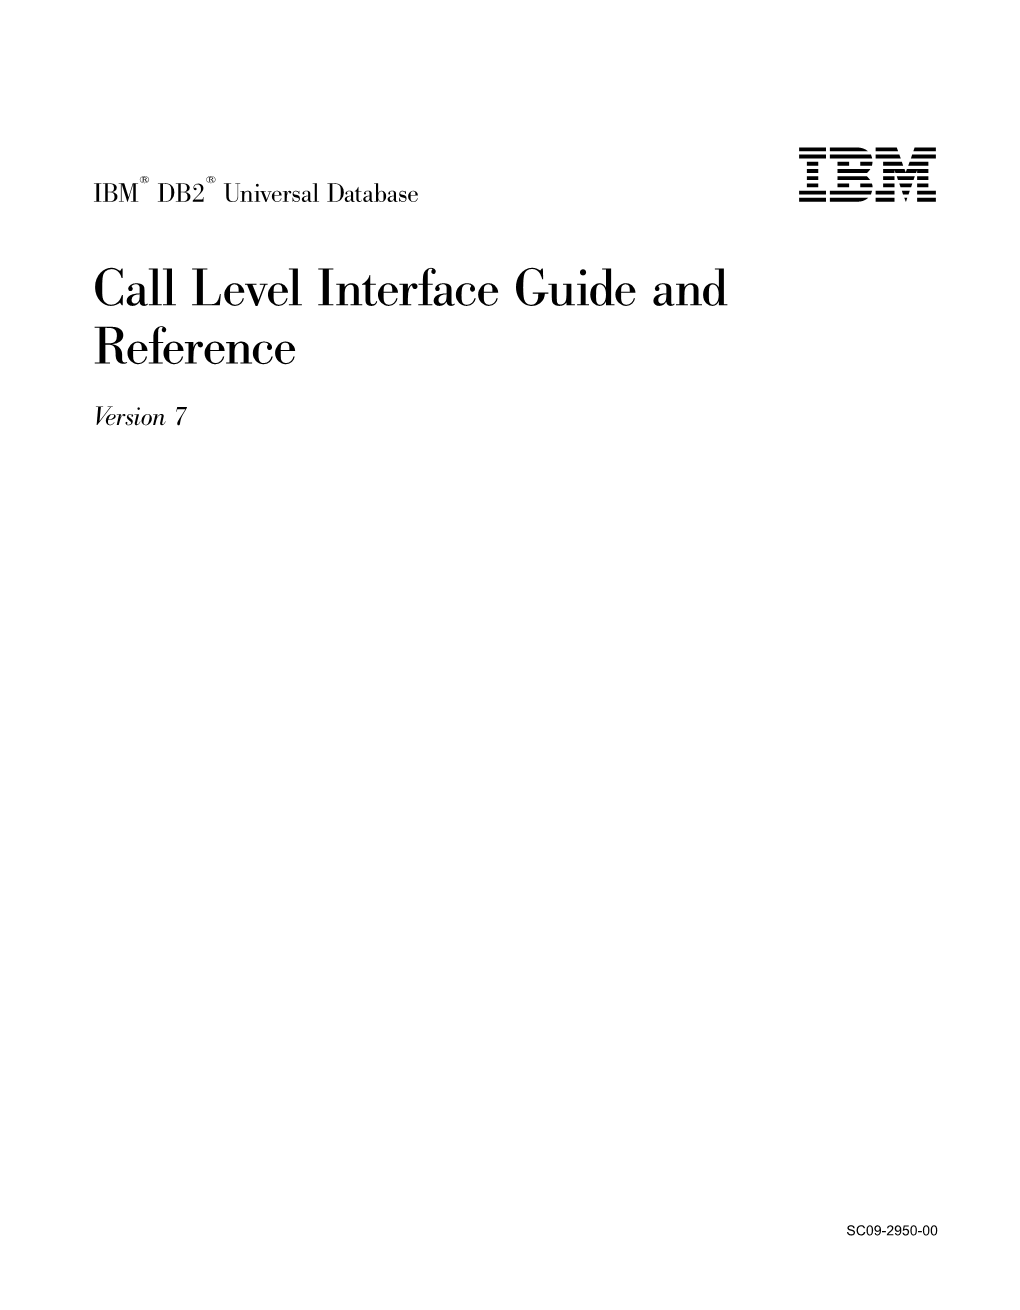 Call Level Interface Guide and Reference Ve R S I O N 7